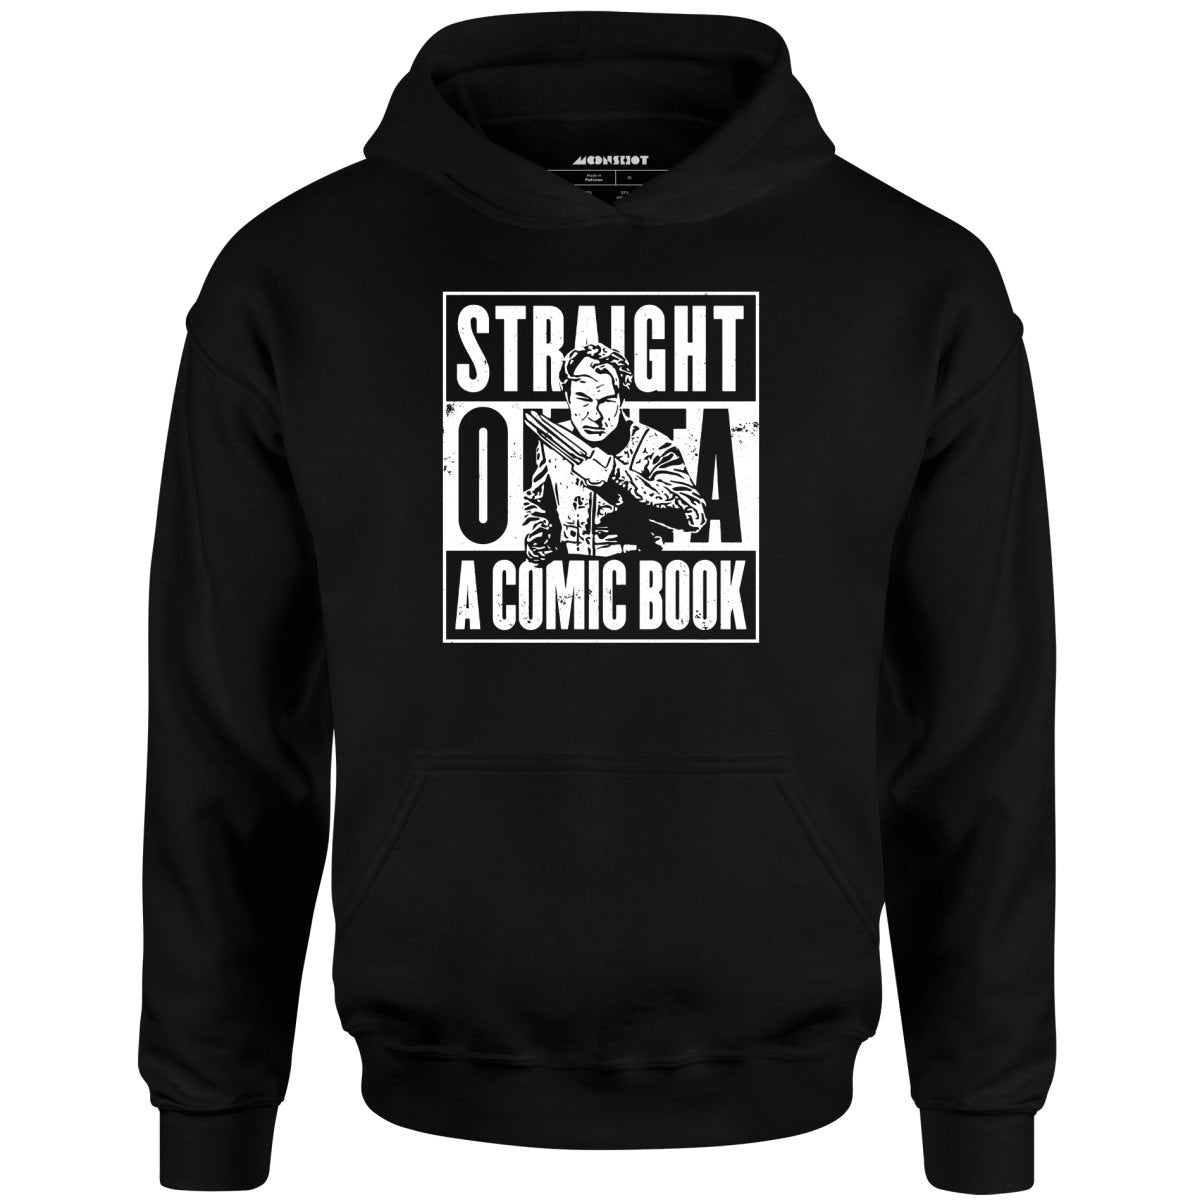 Straight Outta a Comic Book - Unisex Hoodie